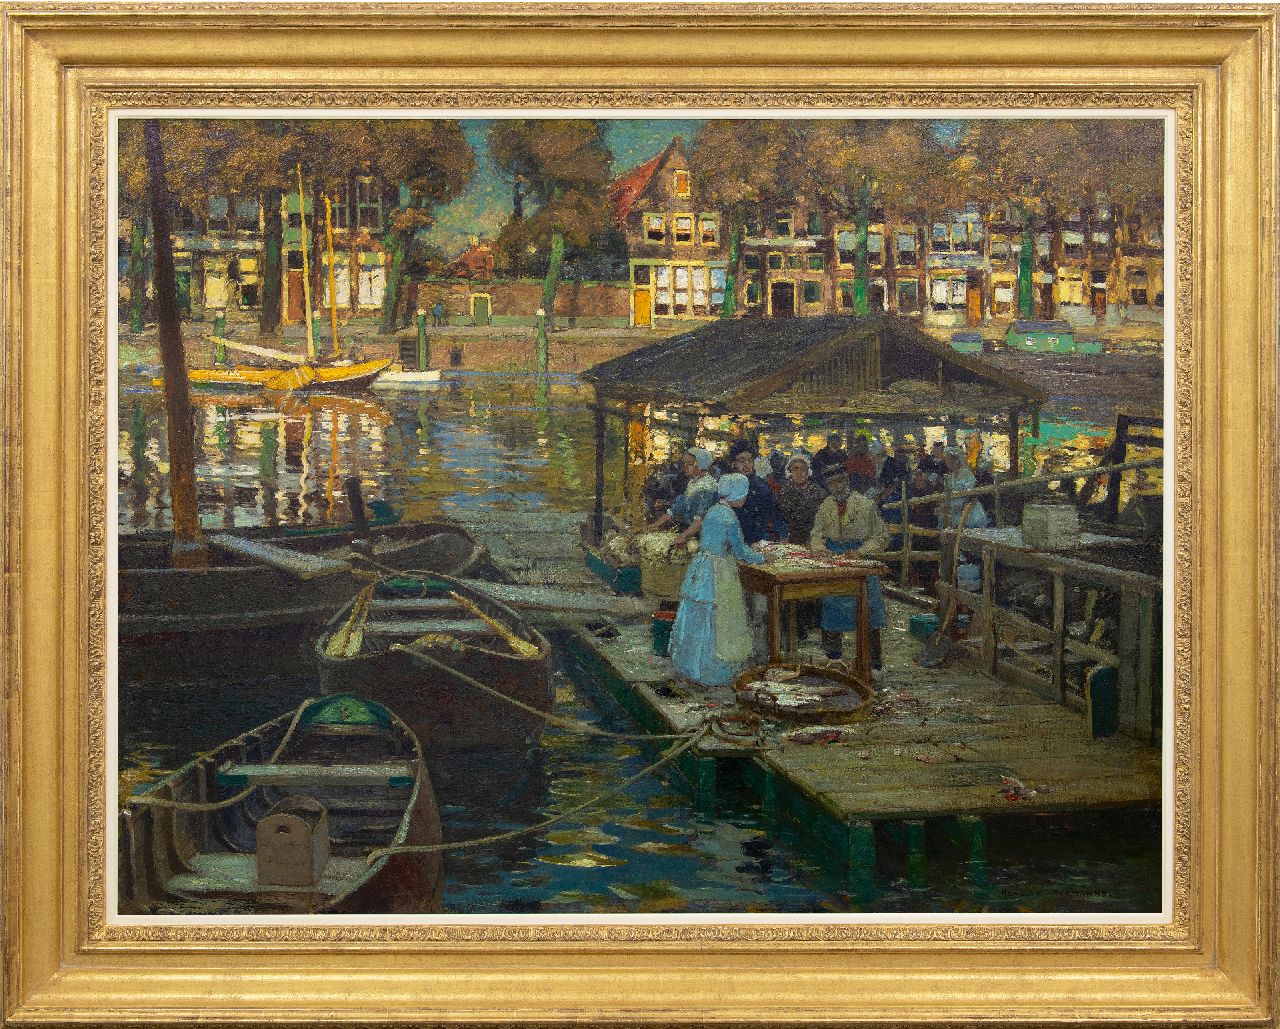 Hermanns H.  | Heinrich Hermanns, A view of the Fish market in the Nieuwe Haven, Dordrecht, oil on canvas 100.5 x 131.6 cm, signed l.r.